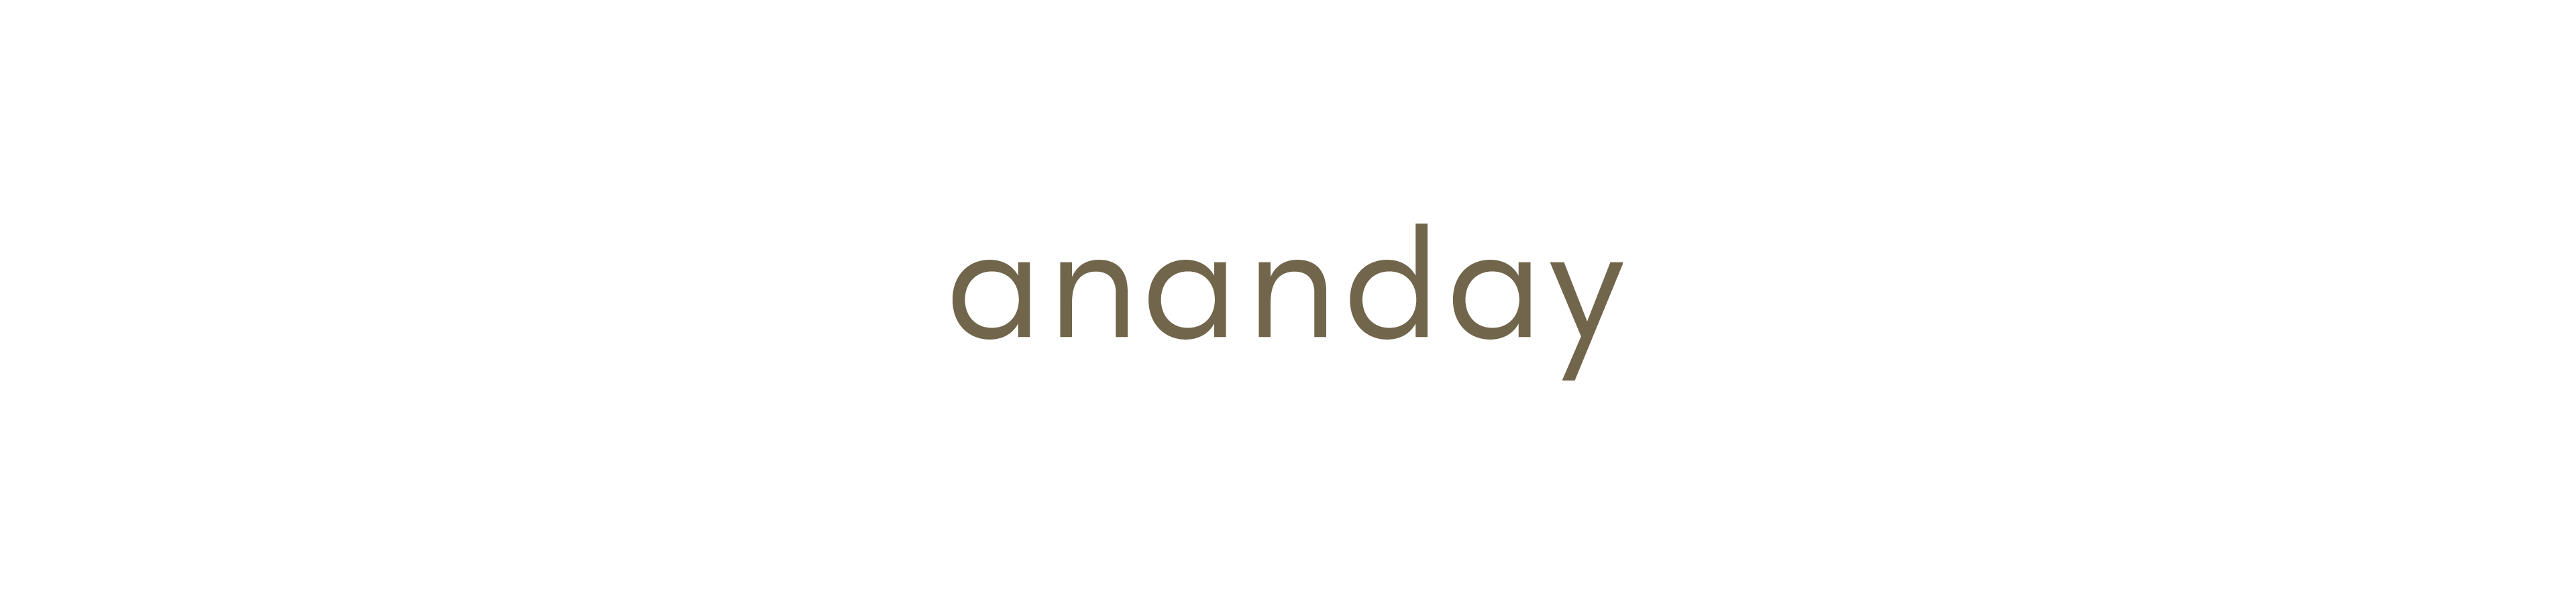 ananday